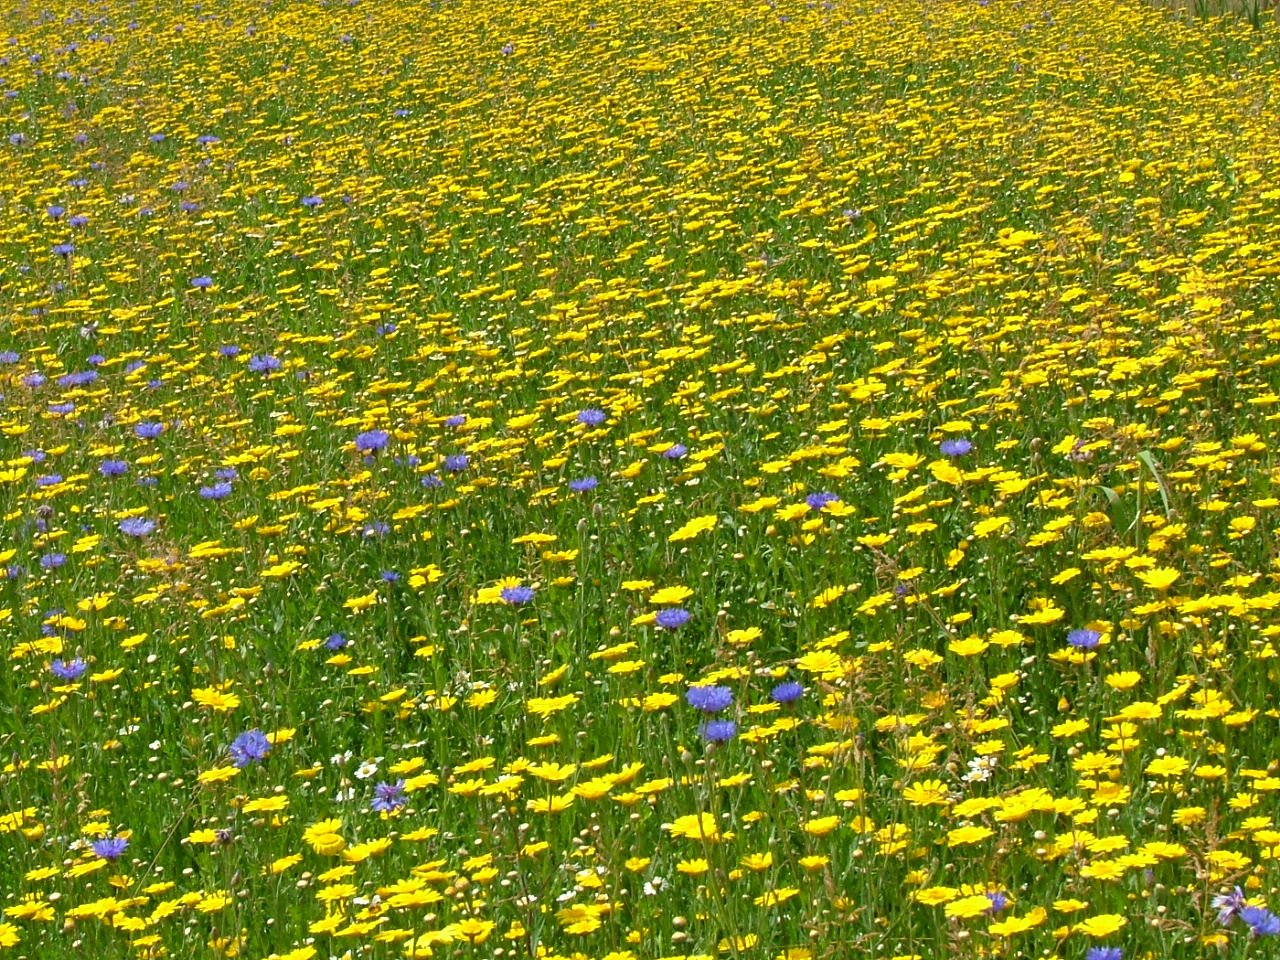 a field filled with yellow and purple flowers